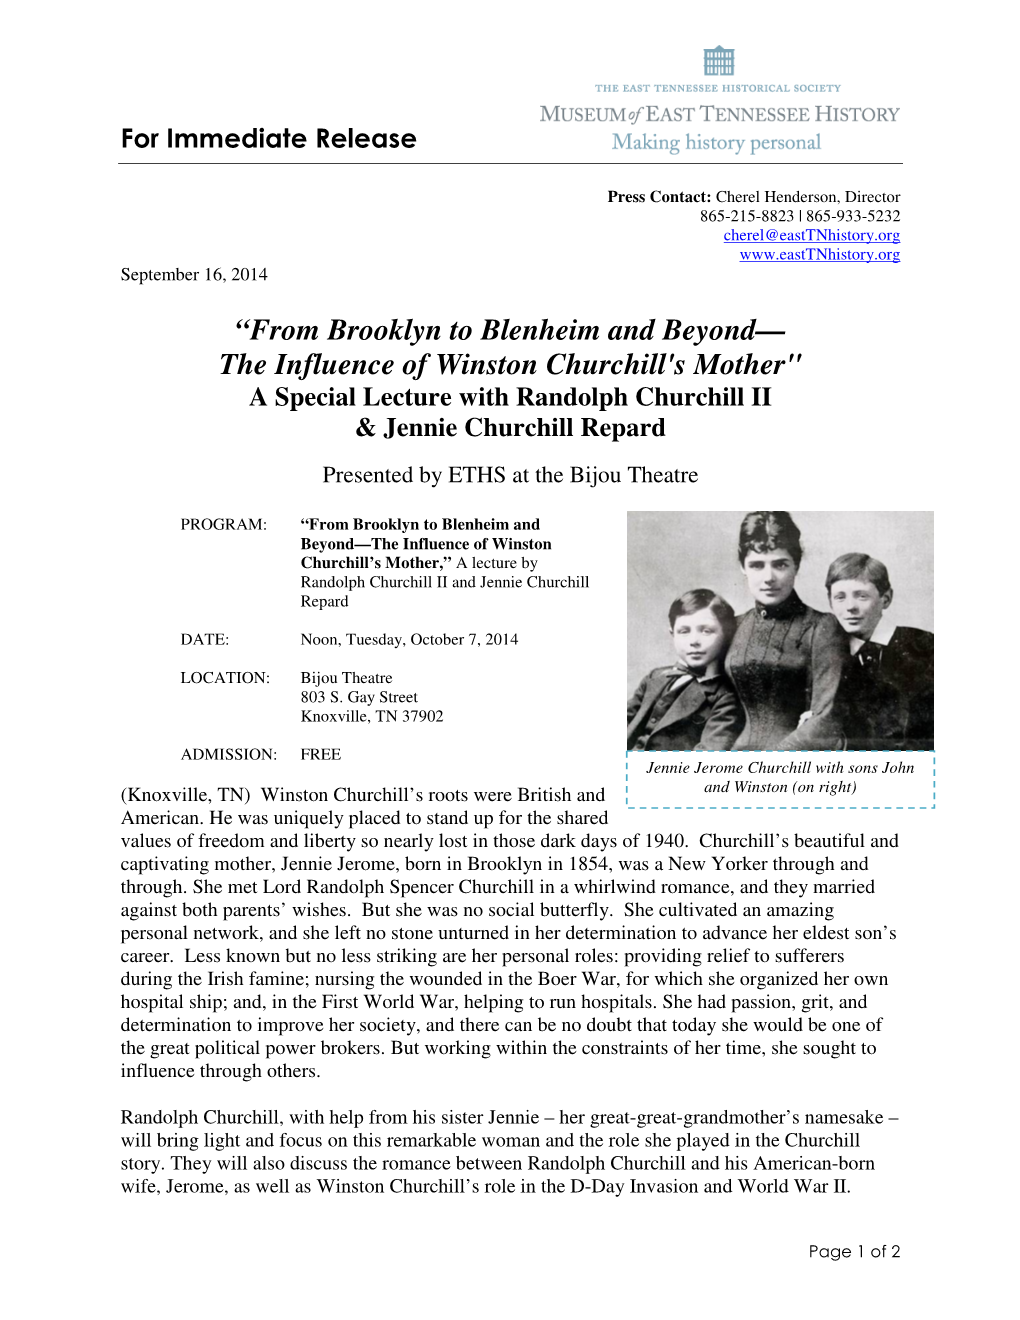 From Brooklyn to Blenheim and Beyond— the Influence of Winston Churchill's Mother" a Special Lecture with Randolph Churchill II & Jennie Churchill Repard